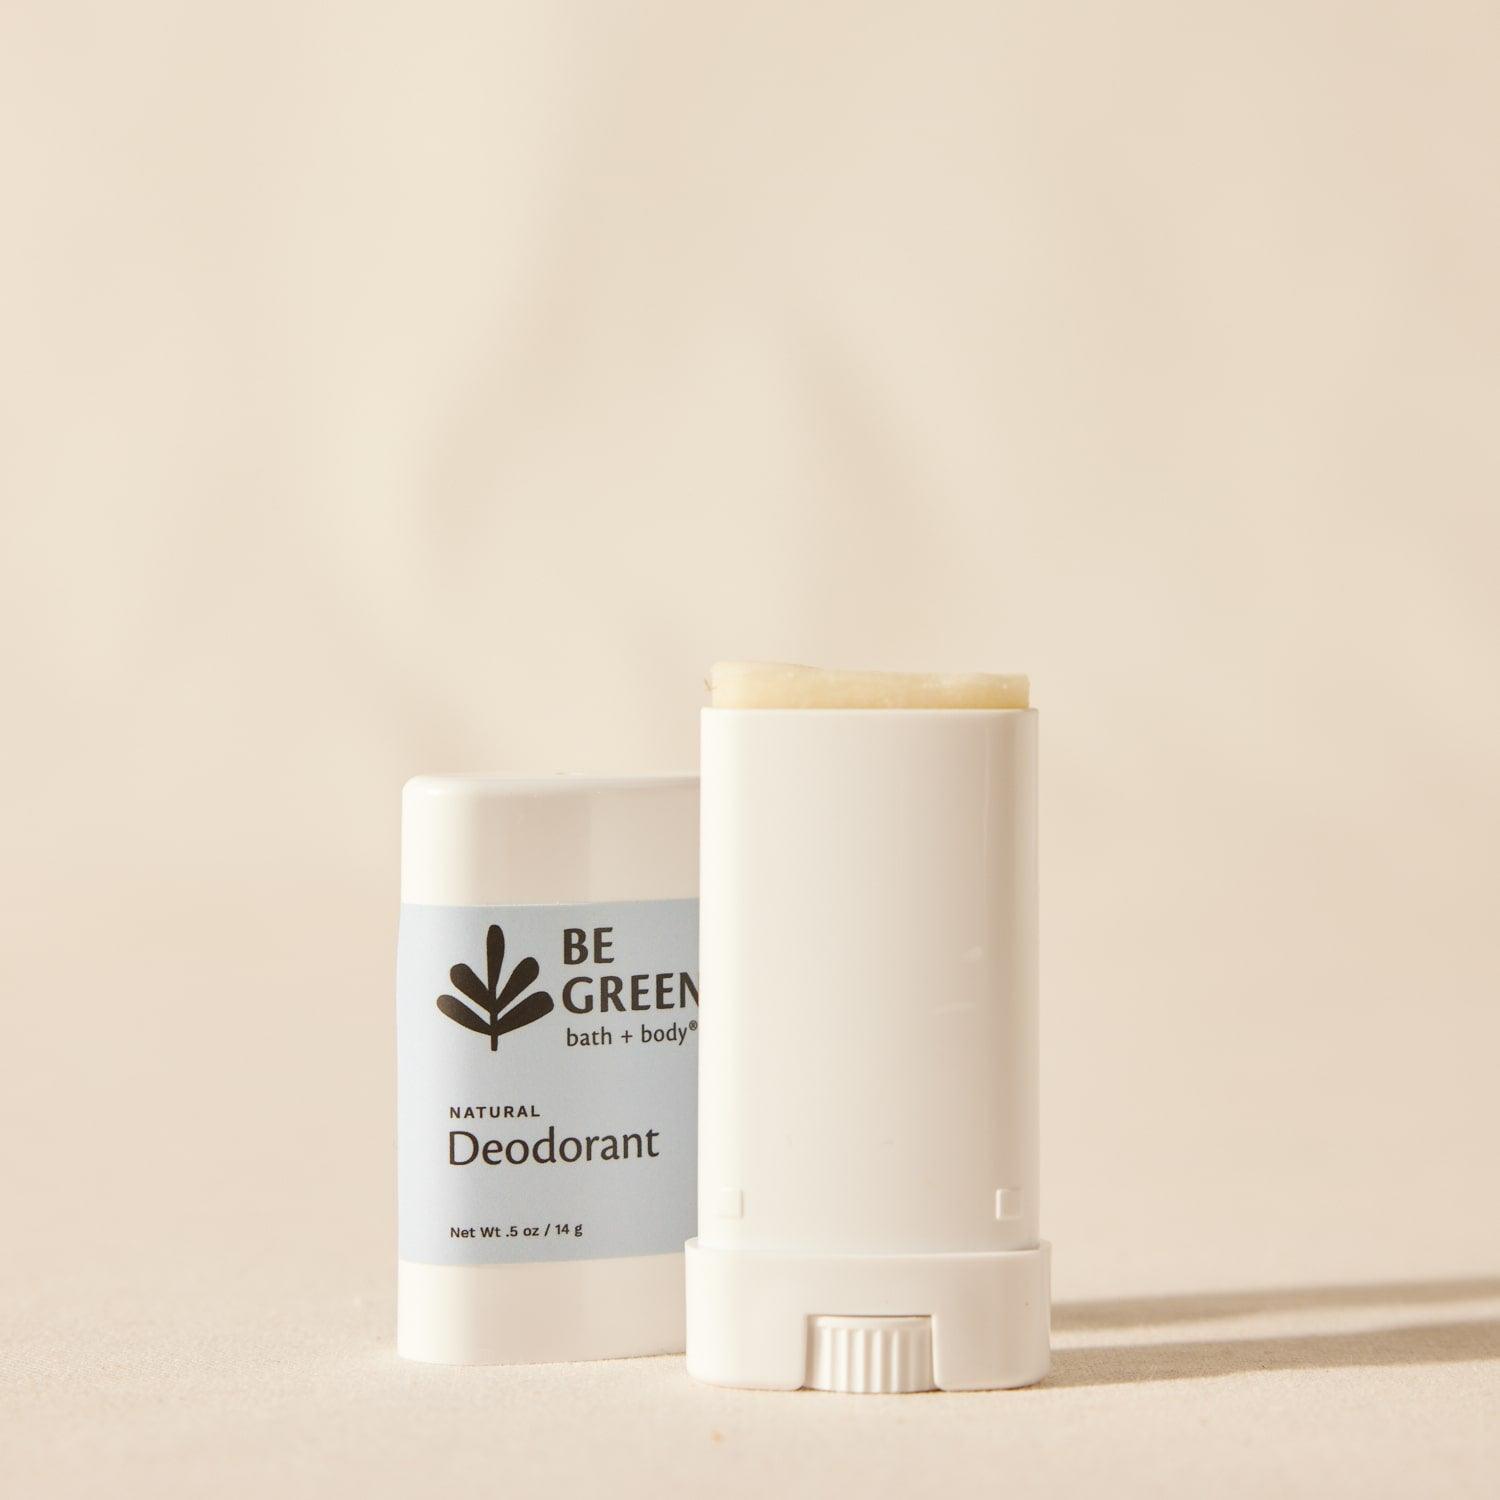 Travel size deodorant with cap removed.